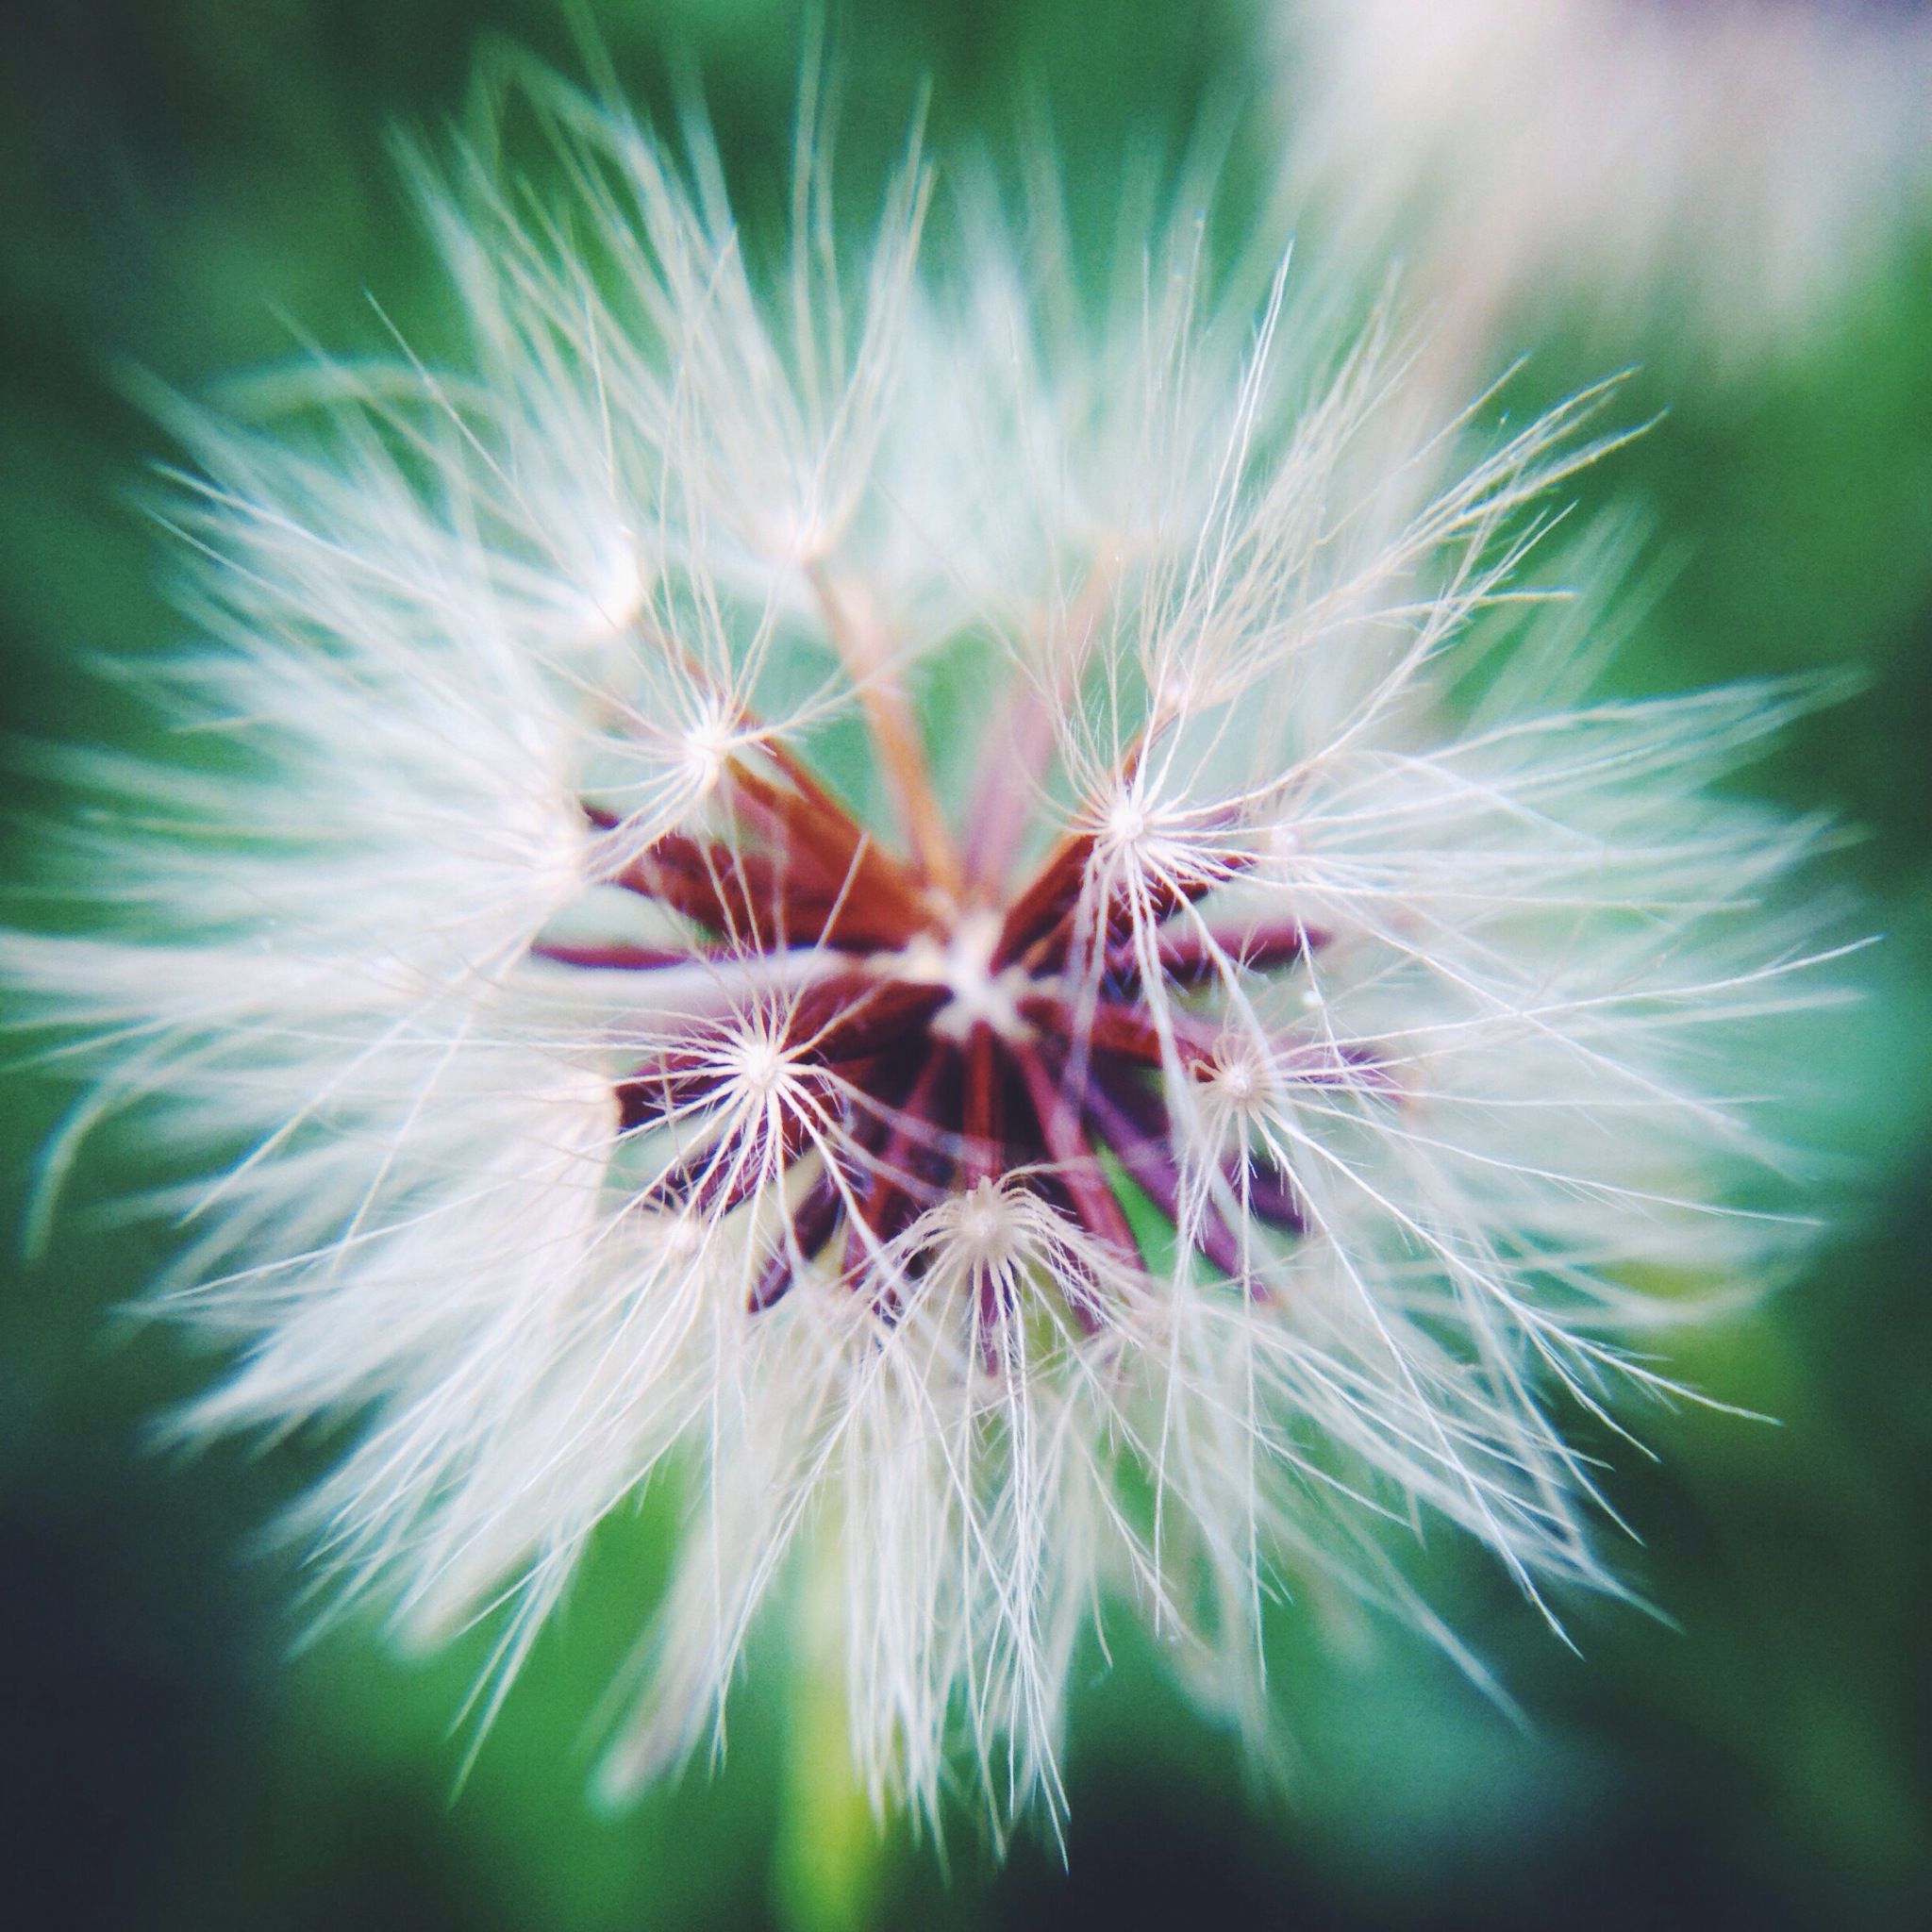 flower, dandelion, fragility, freshness, growth, flower head, close-up, beauty in nature, single flower, nature, focus on foreground, softness, plant, uncultivated, wildflower, white color, selective focus, dandelion seed, day, outdoors